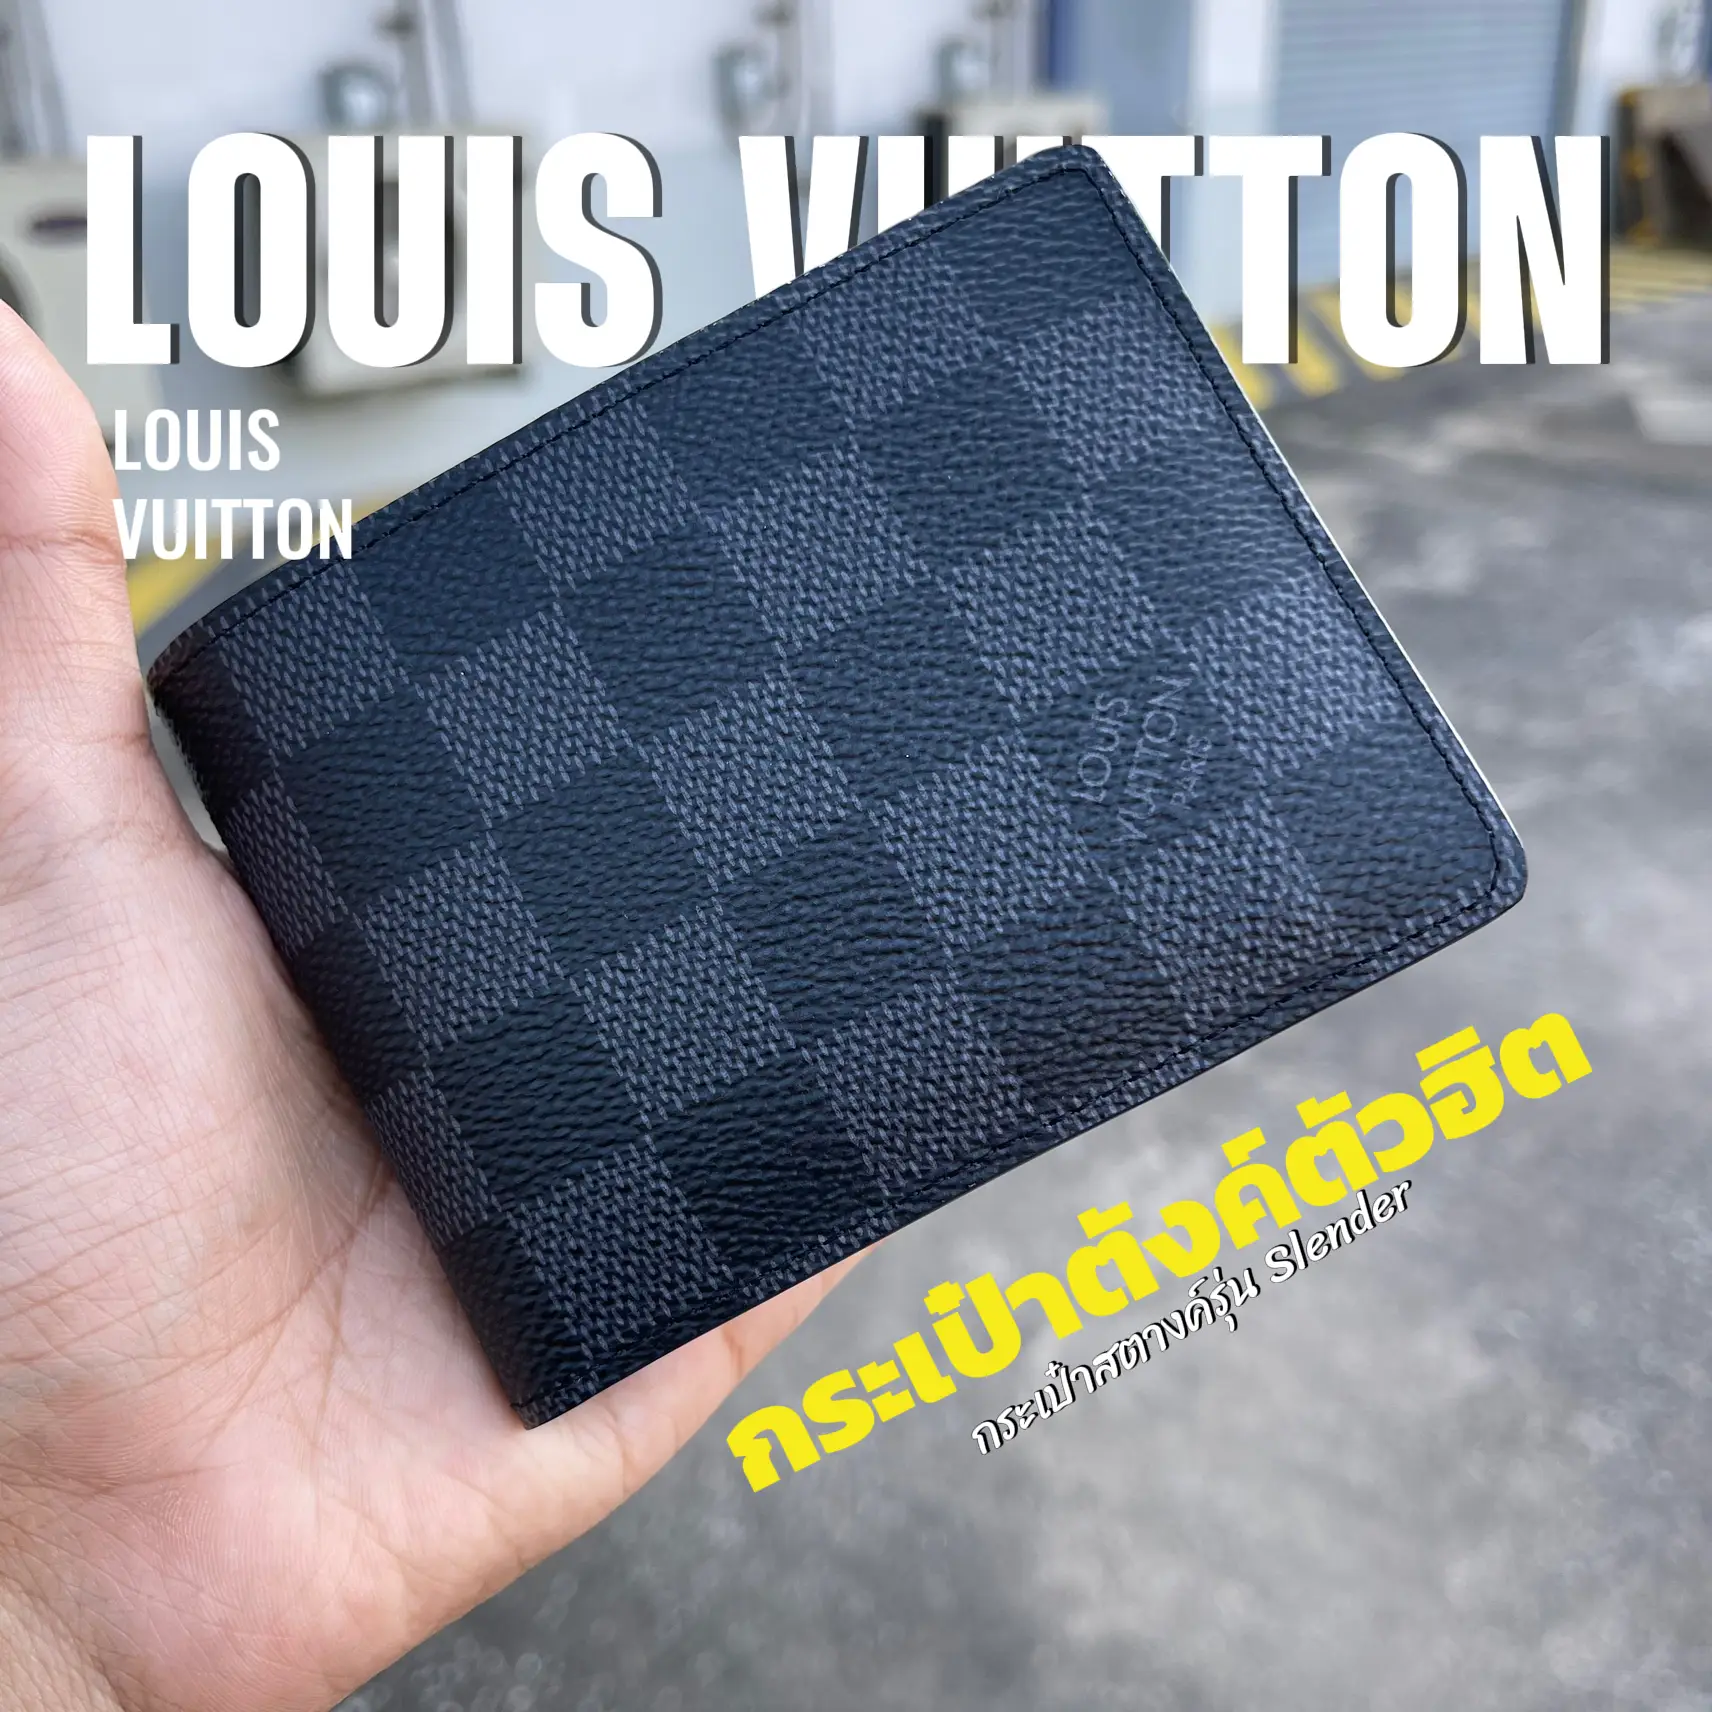 LOUIS VUITTON POCKET YOUR MEN'S HIT VERSION!! So Beautiful, Gallery posted  by CHXM CHOM